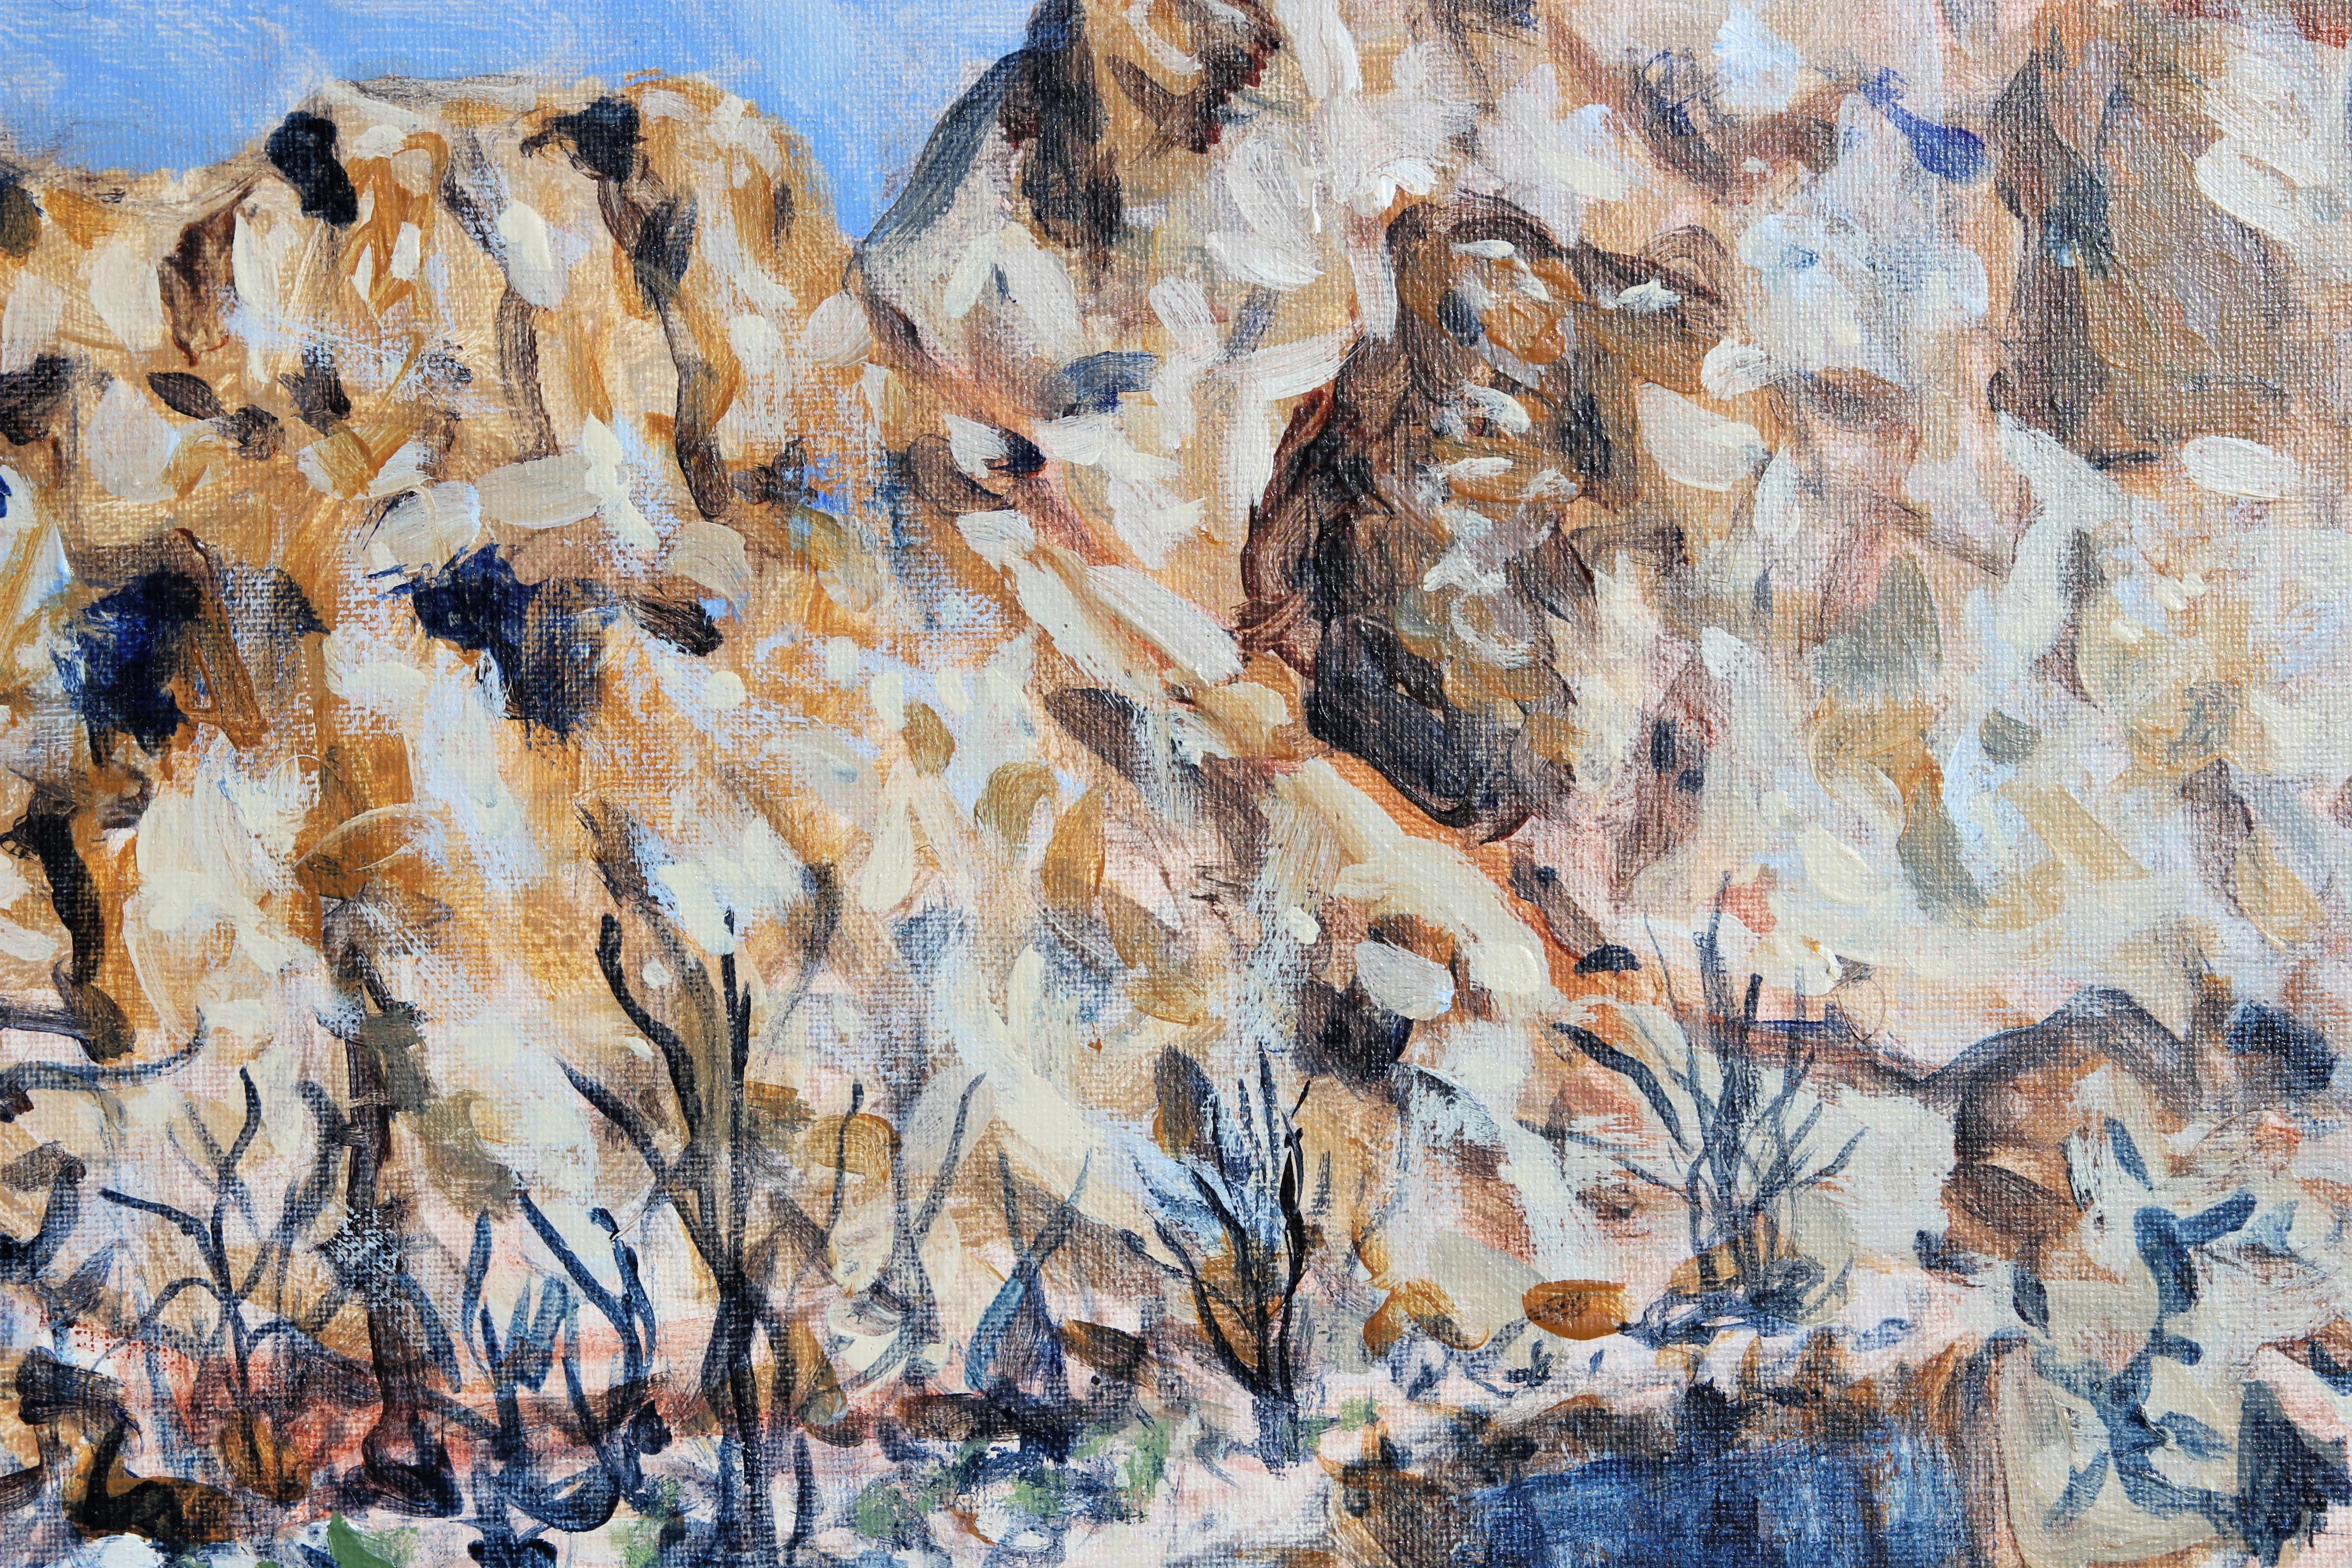 Blue and tan toned abstract mountain landscape by Houston, Texas artist Earl Staley. The work features a scenic view of Mule Ear Peak in the Chisos Mountains located in Big Bend National Park. This piece was completed in memory of fellow Texas